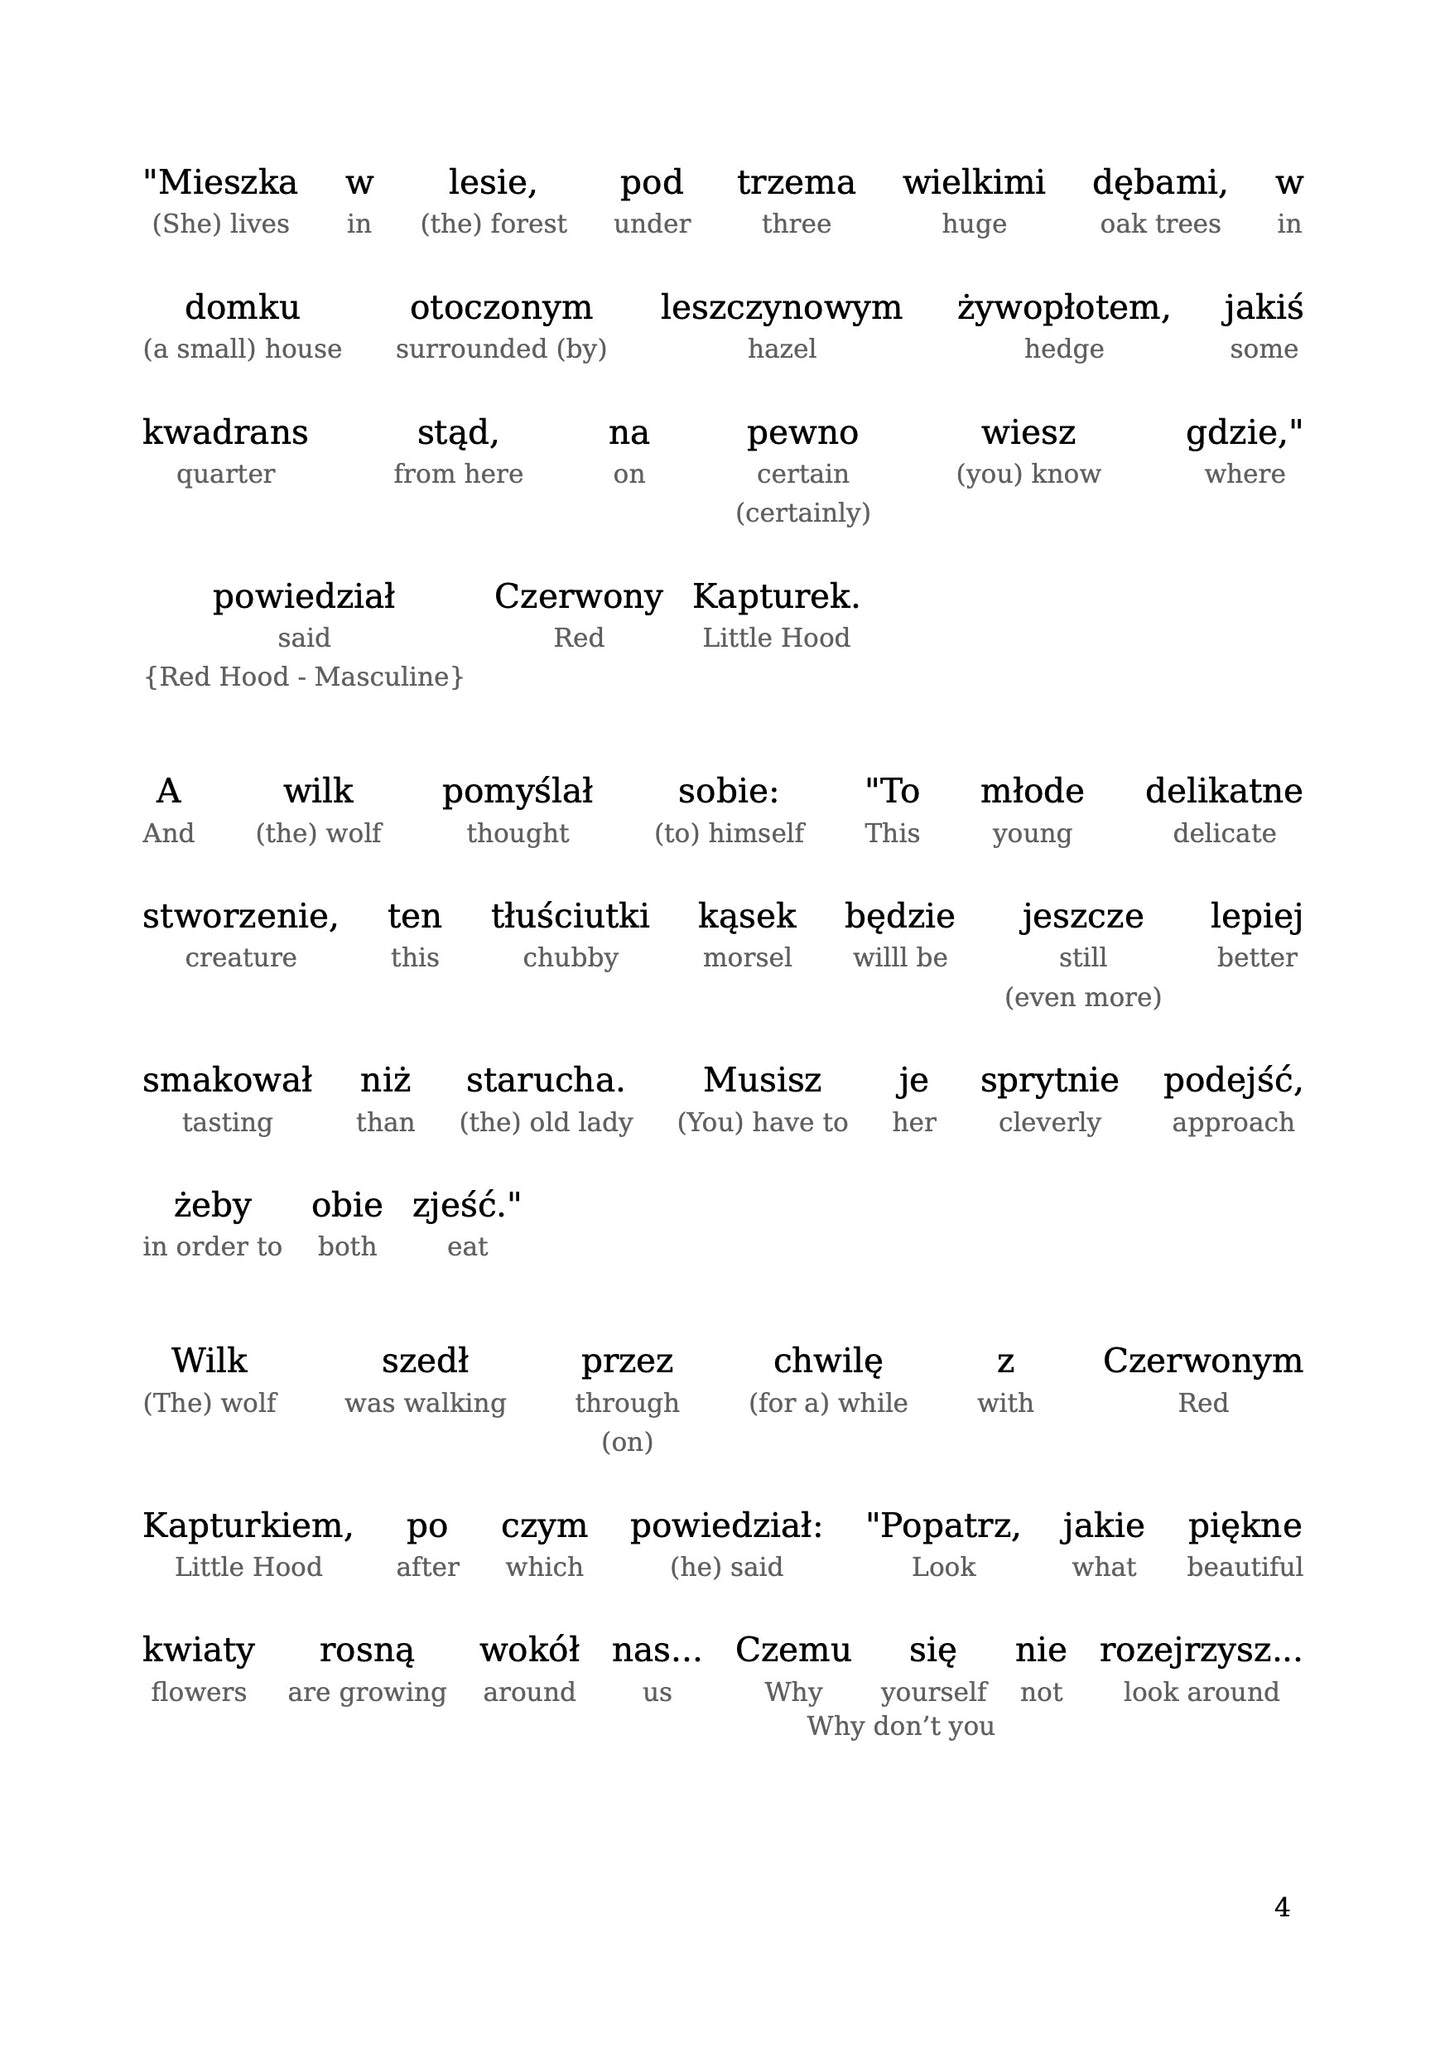 HypLern - Learn Polish with Starter Stories - Interlinear PDF, Epub, Mobi and separate Audio